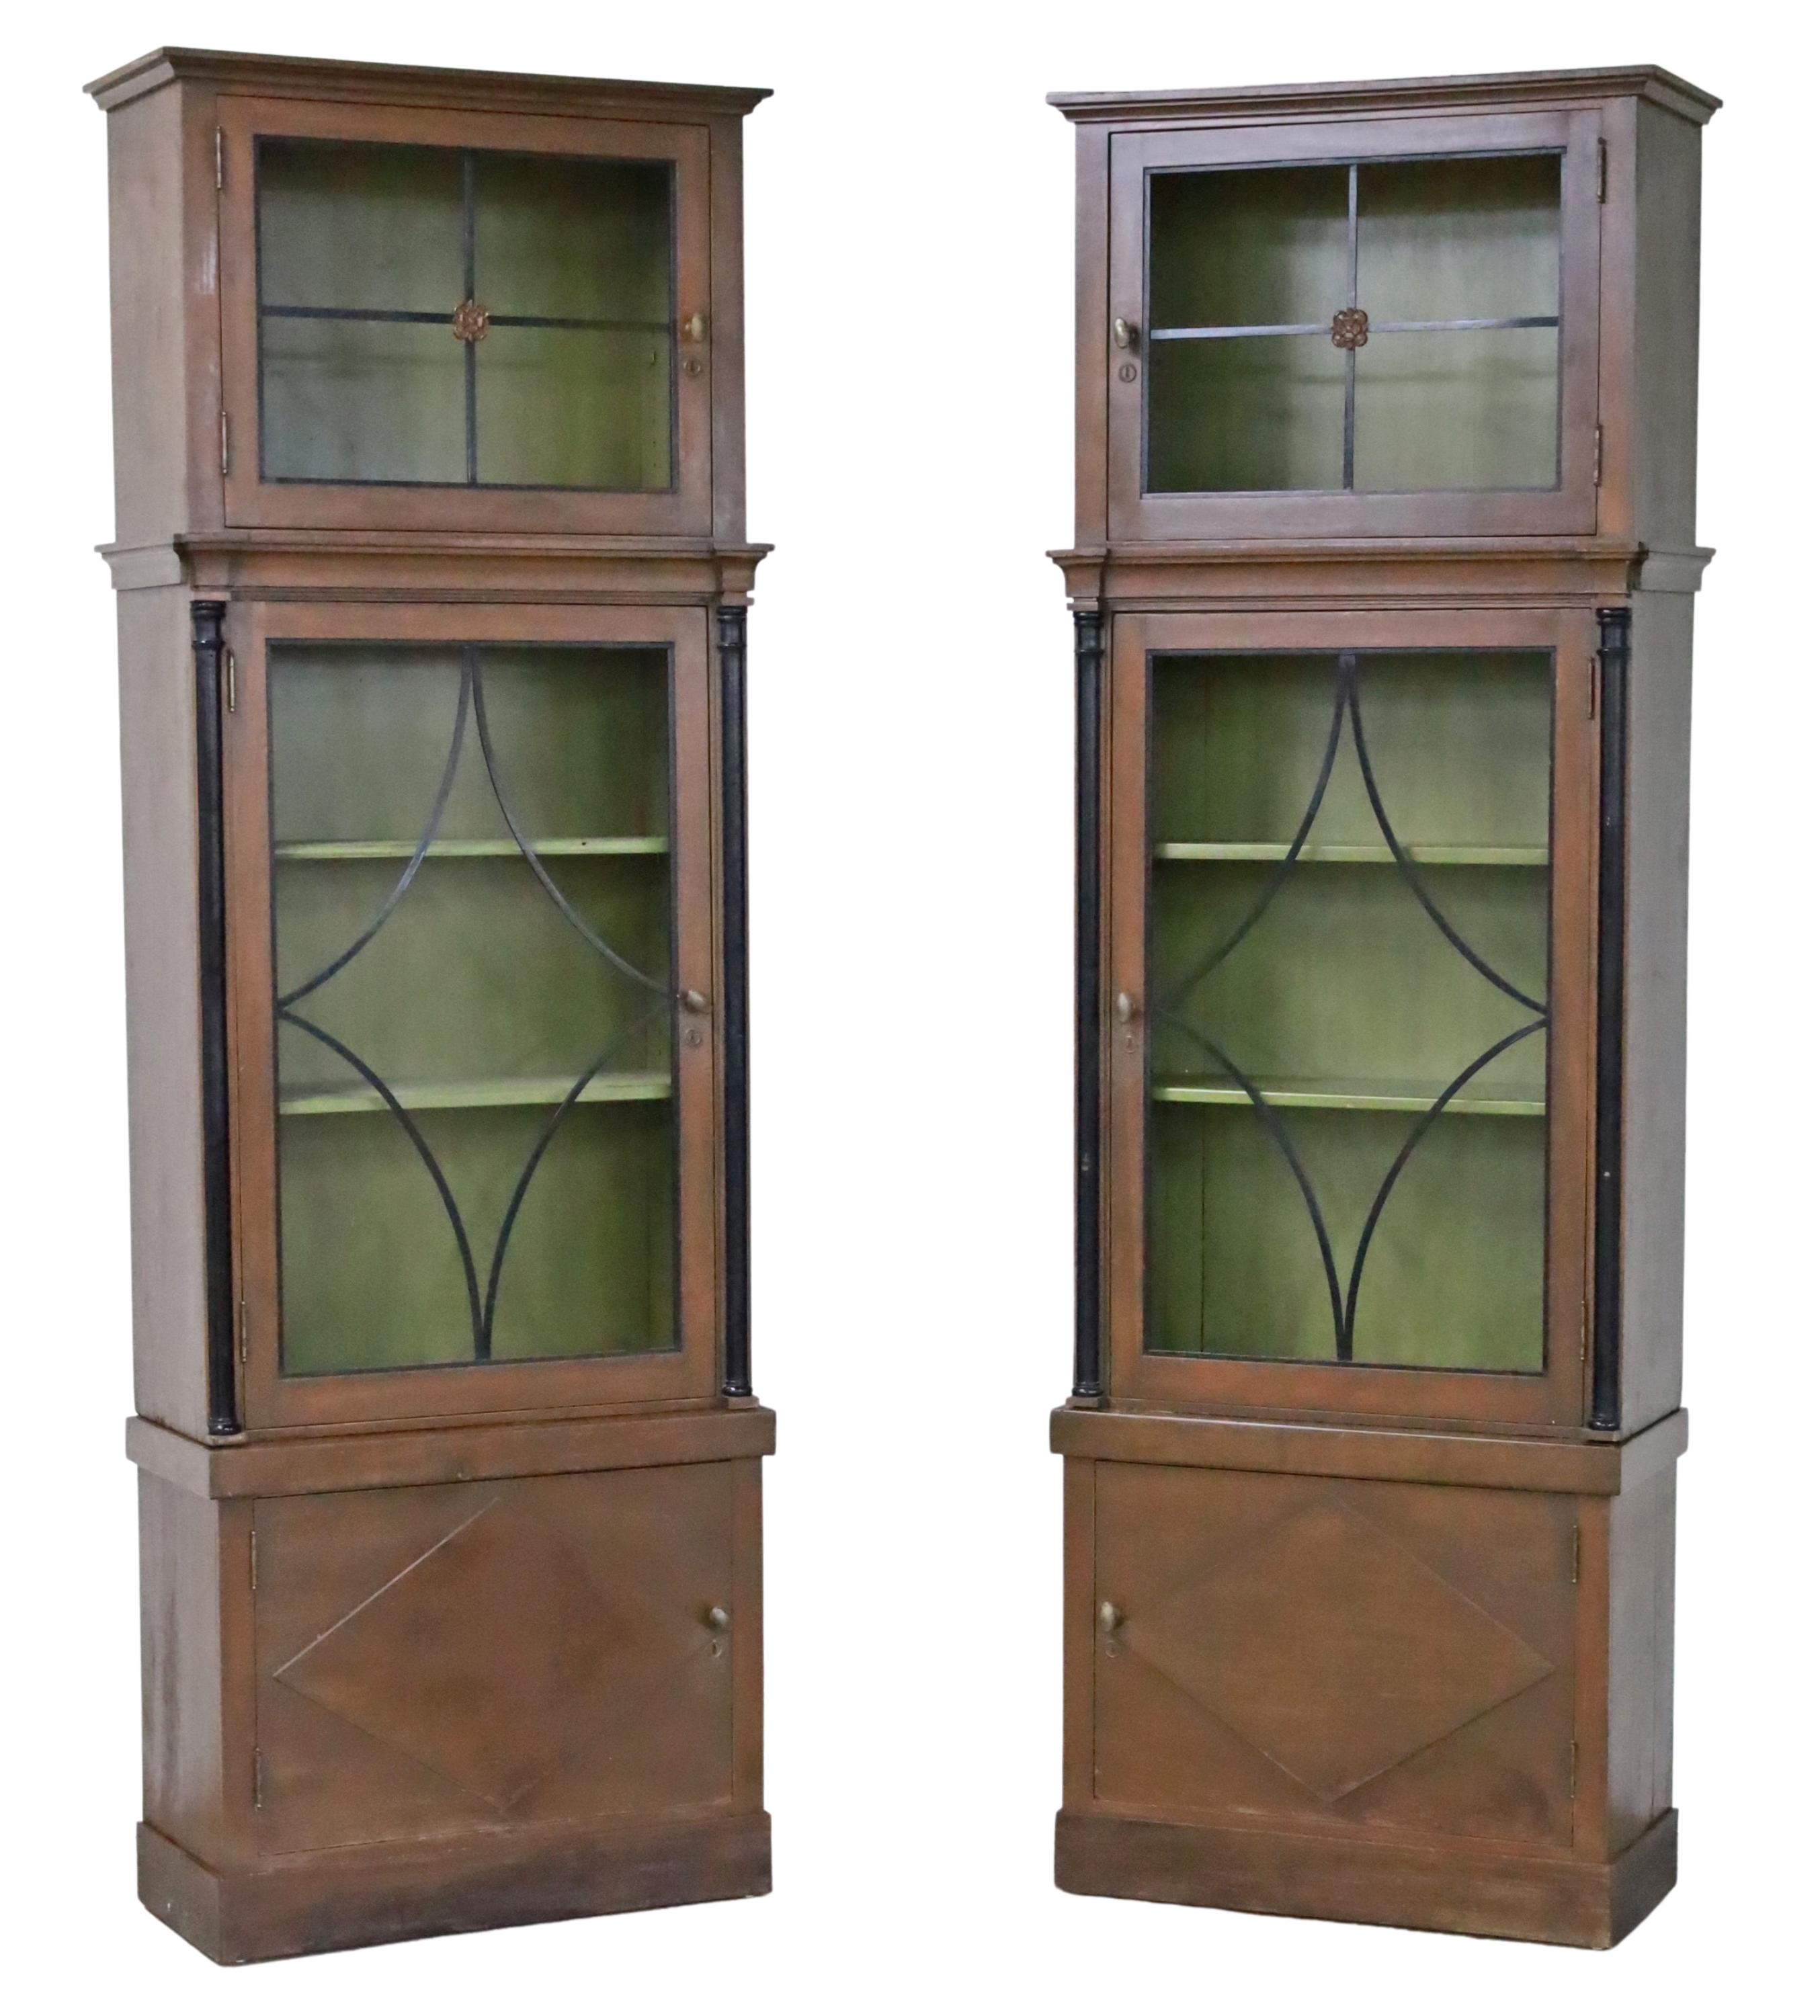 PR. OF DIRECTOIRE STYLE BOOKCASES